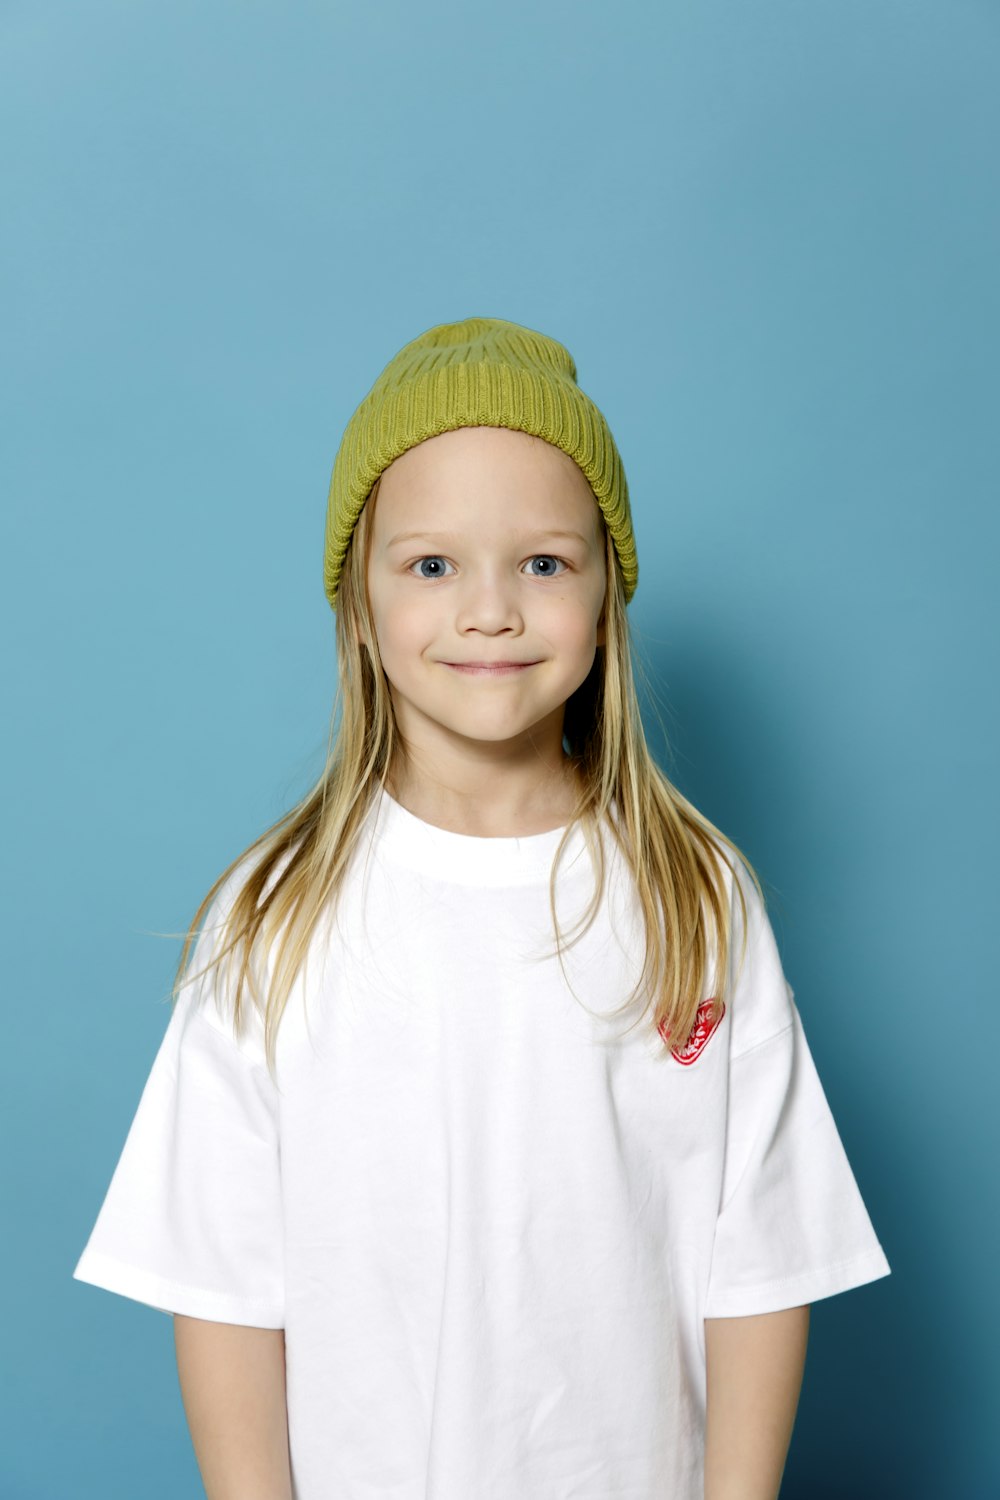 a young girl wearing a white shirt and a green hat